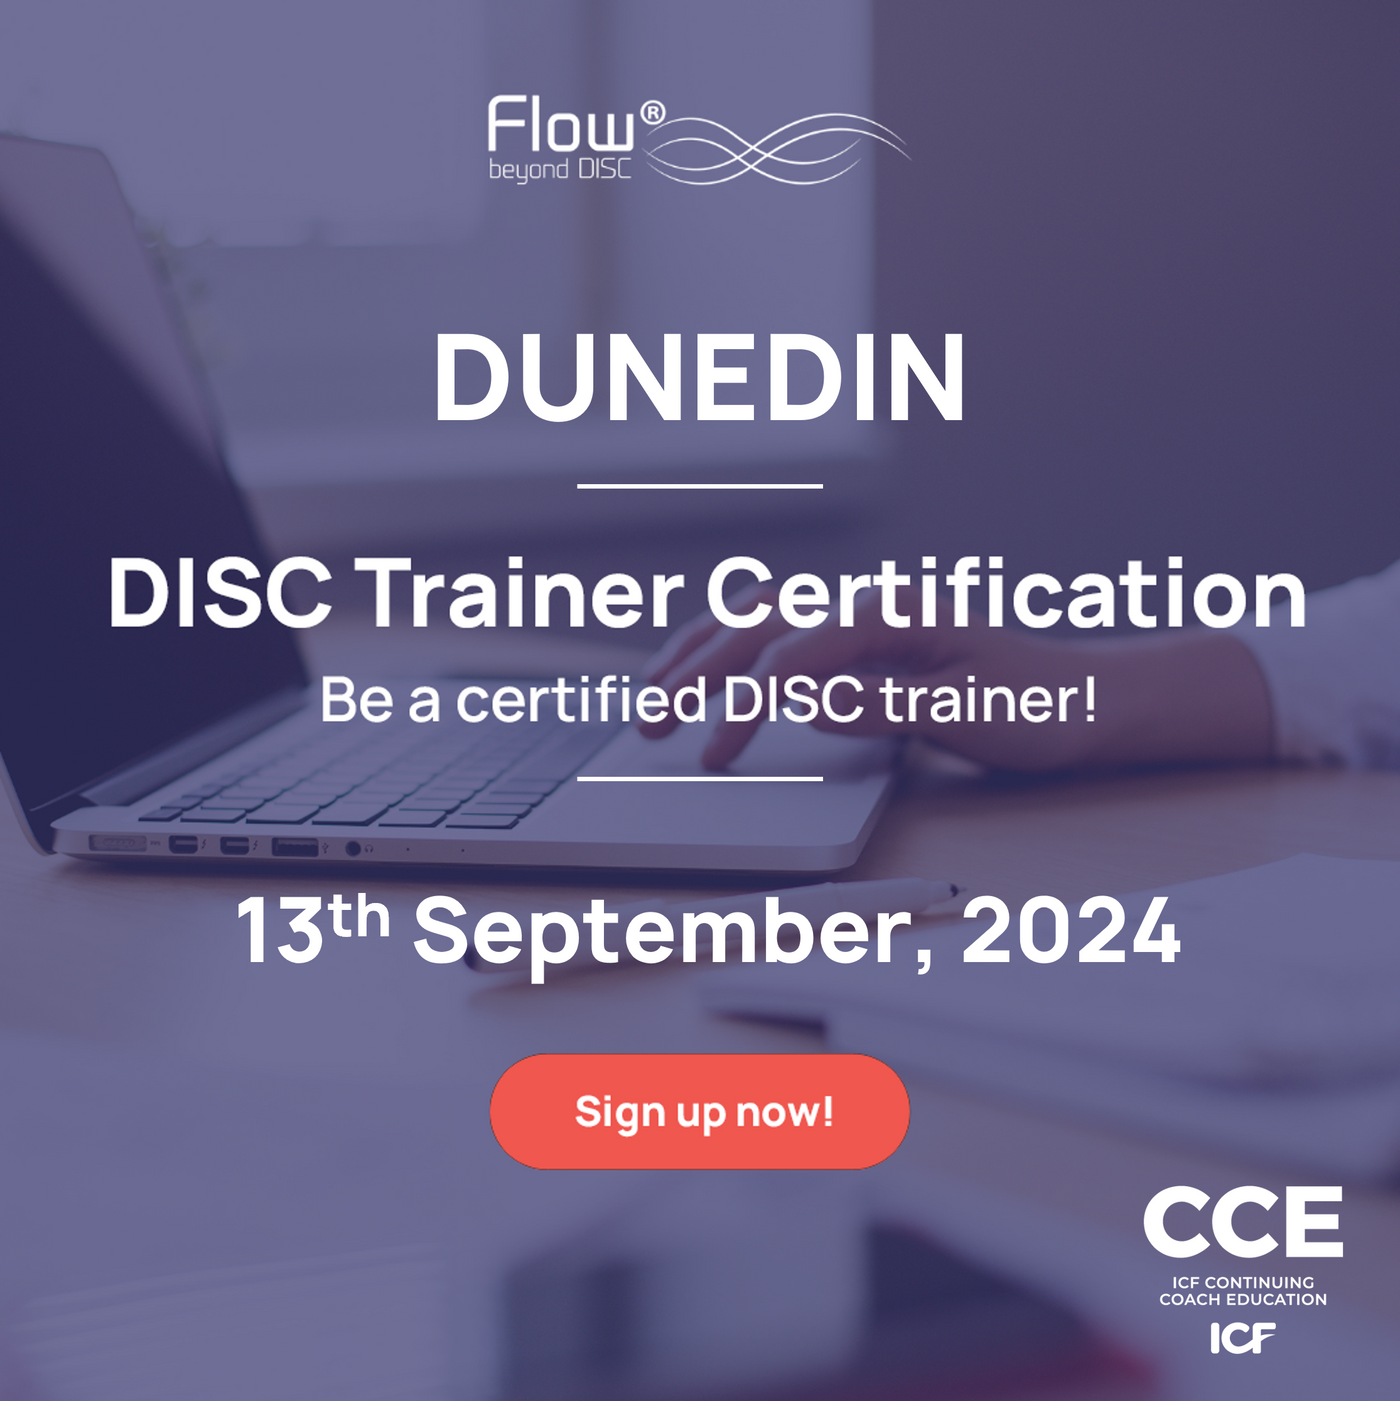 DUNEDIN Advanced Certification Course - receives ICF CCE points